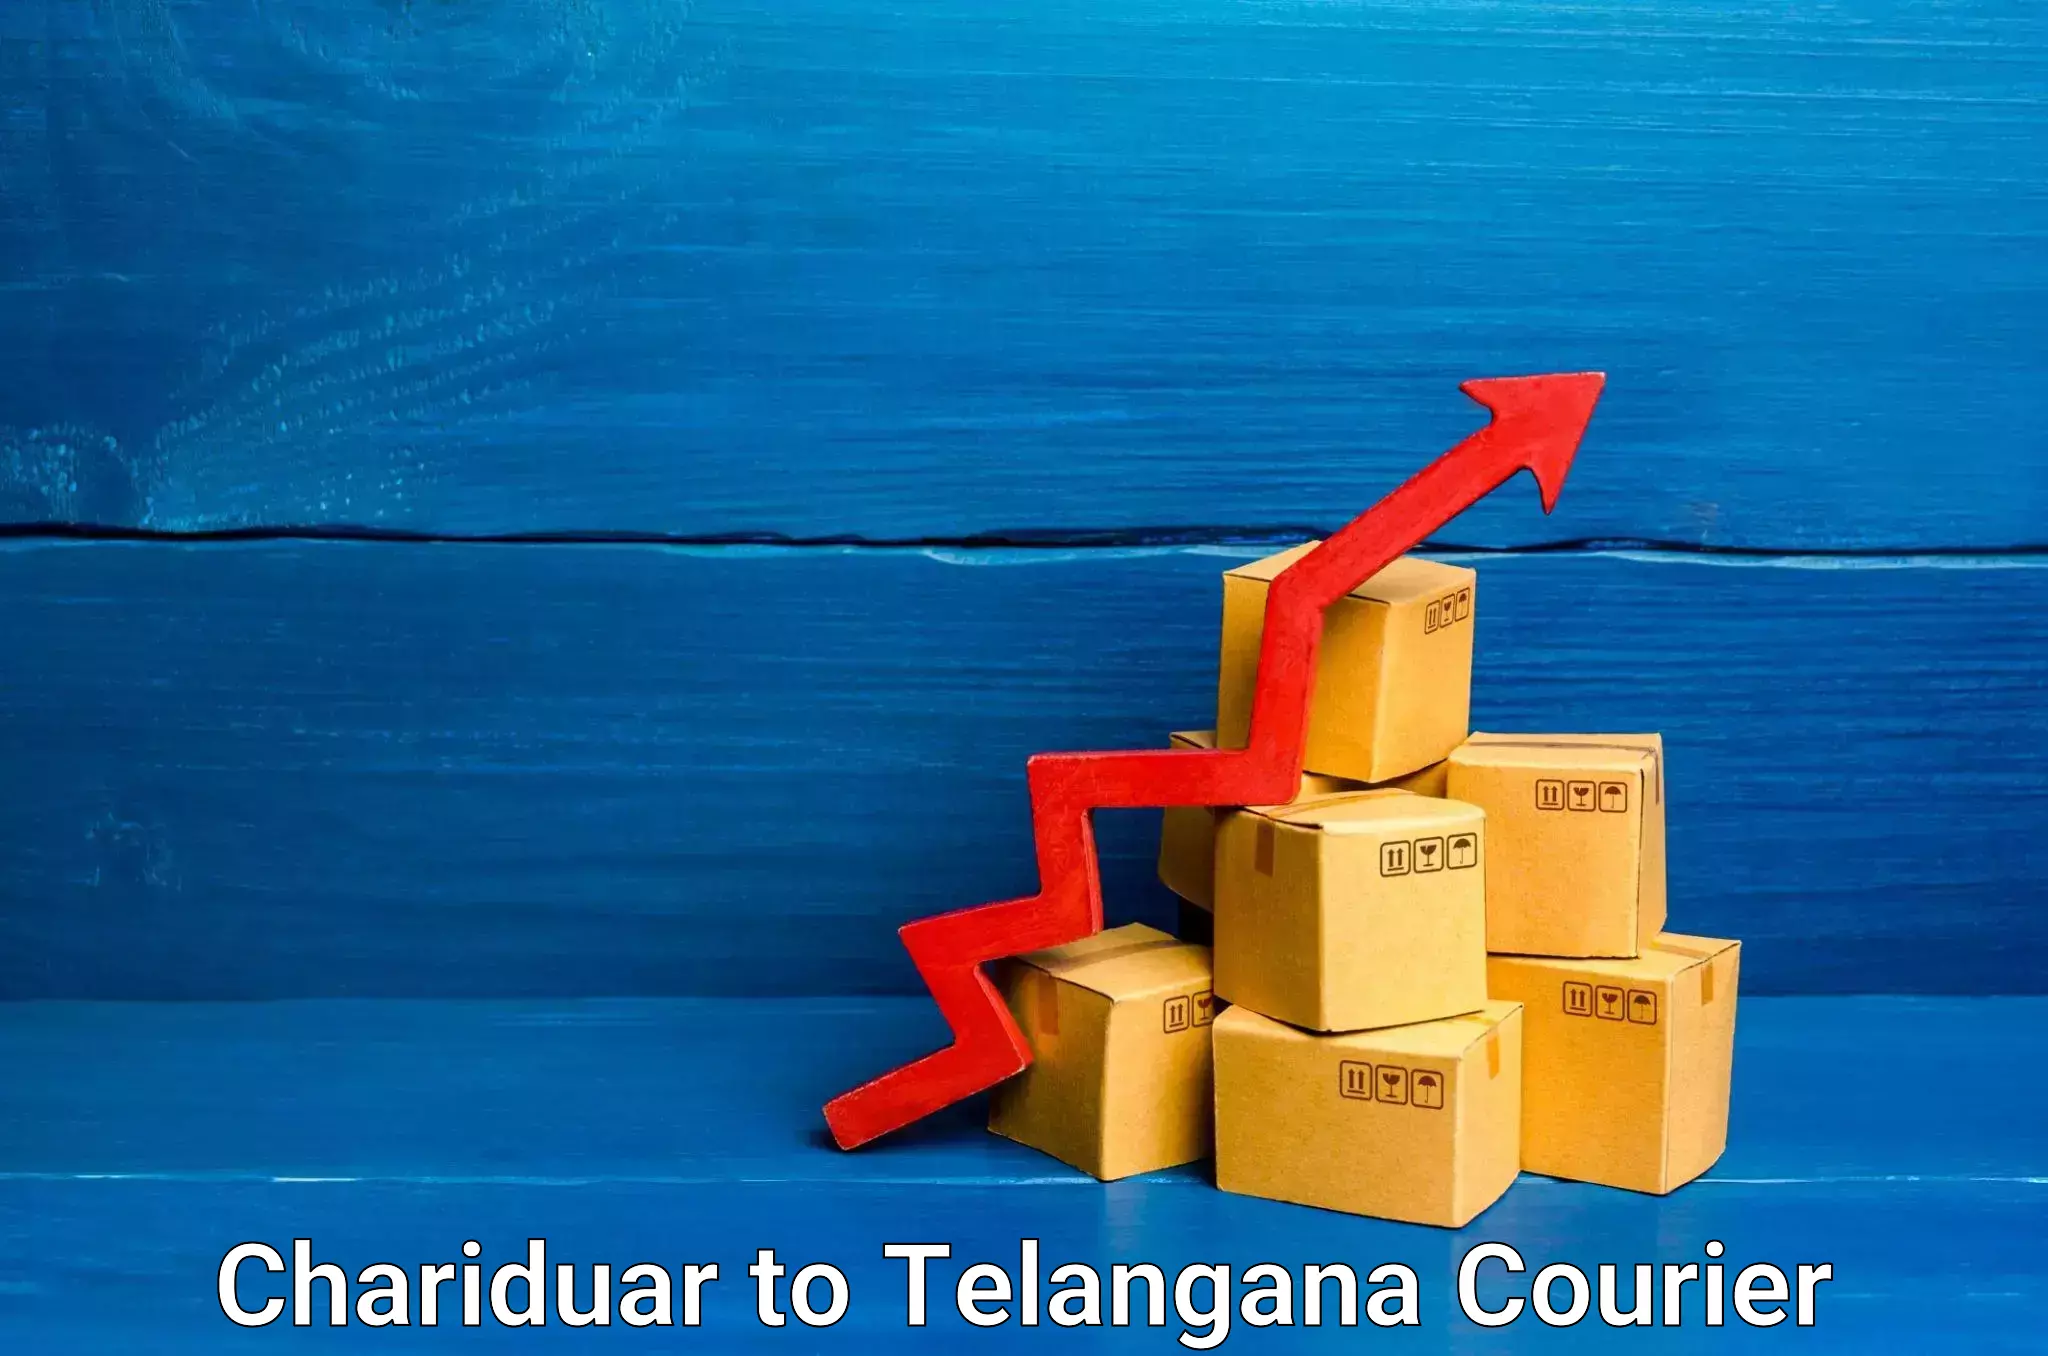 State-of-the-art courier technology Chariduar to Nalgonda